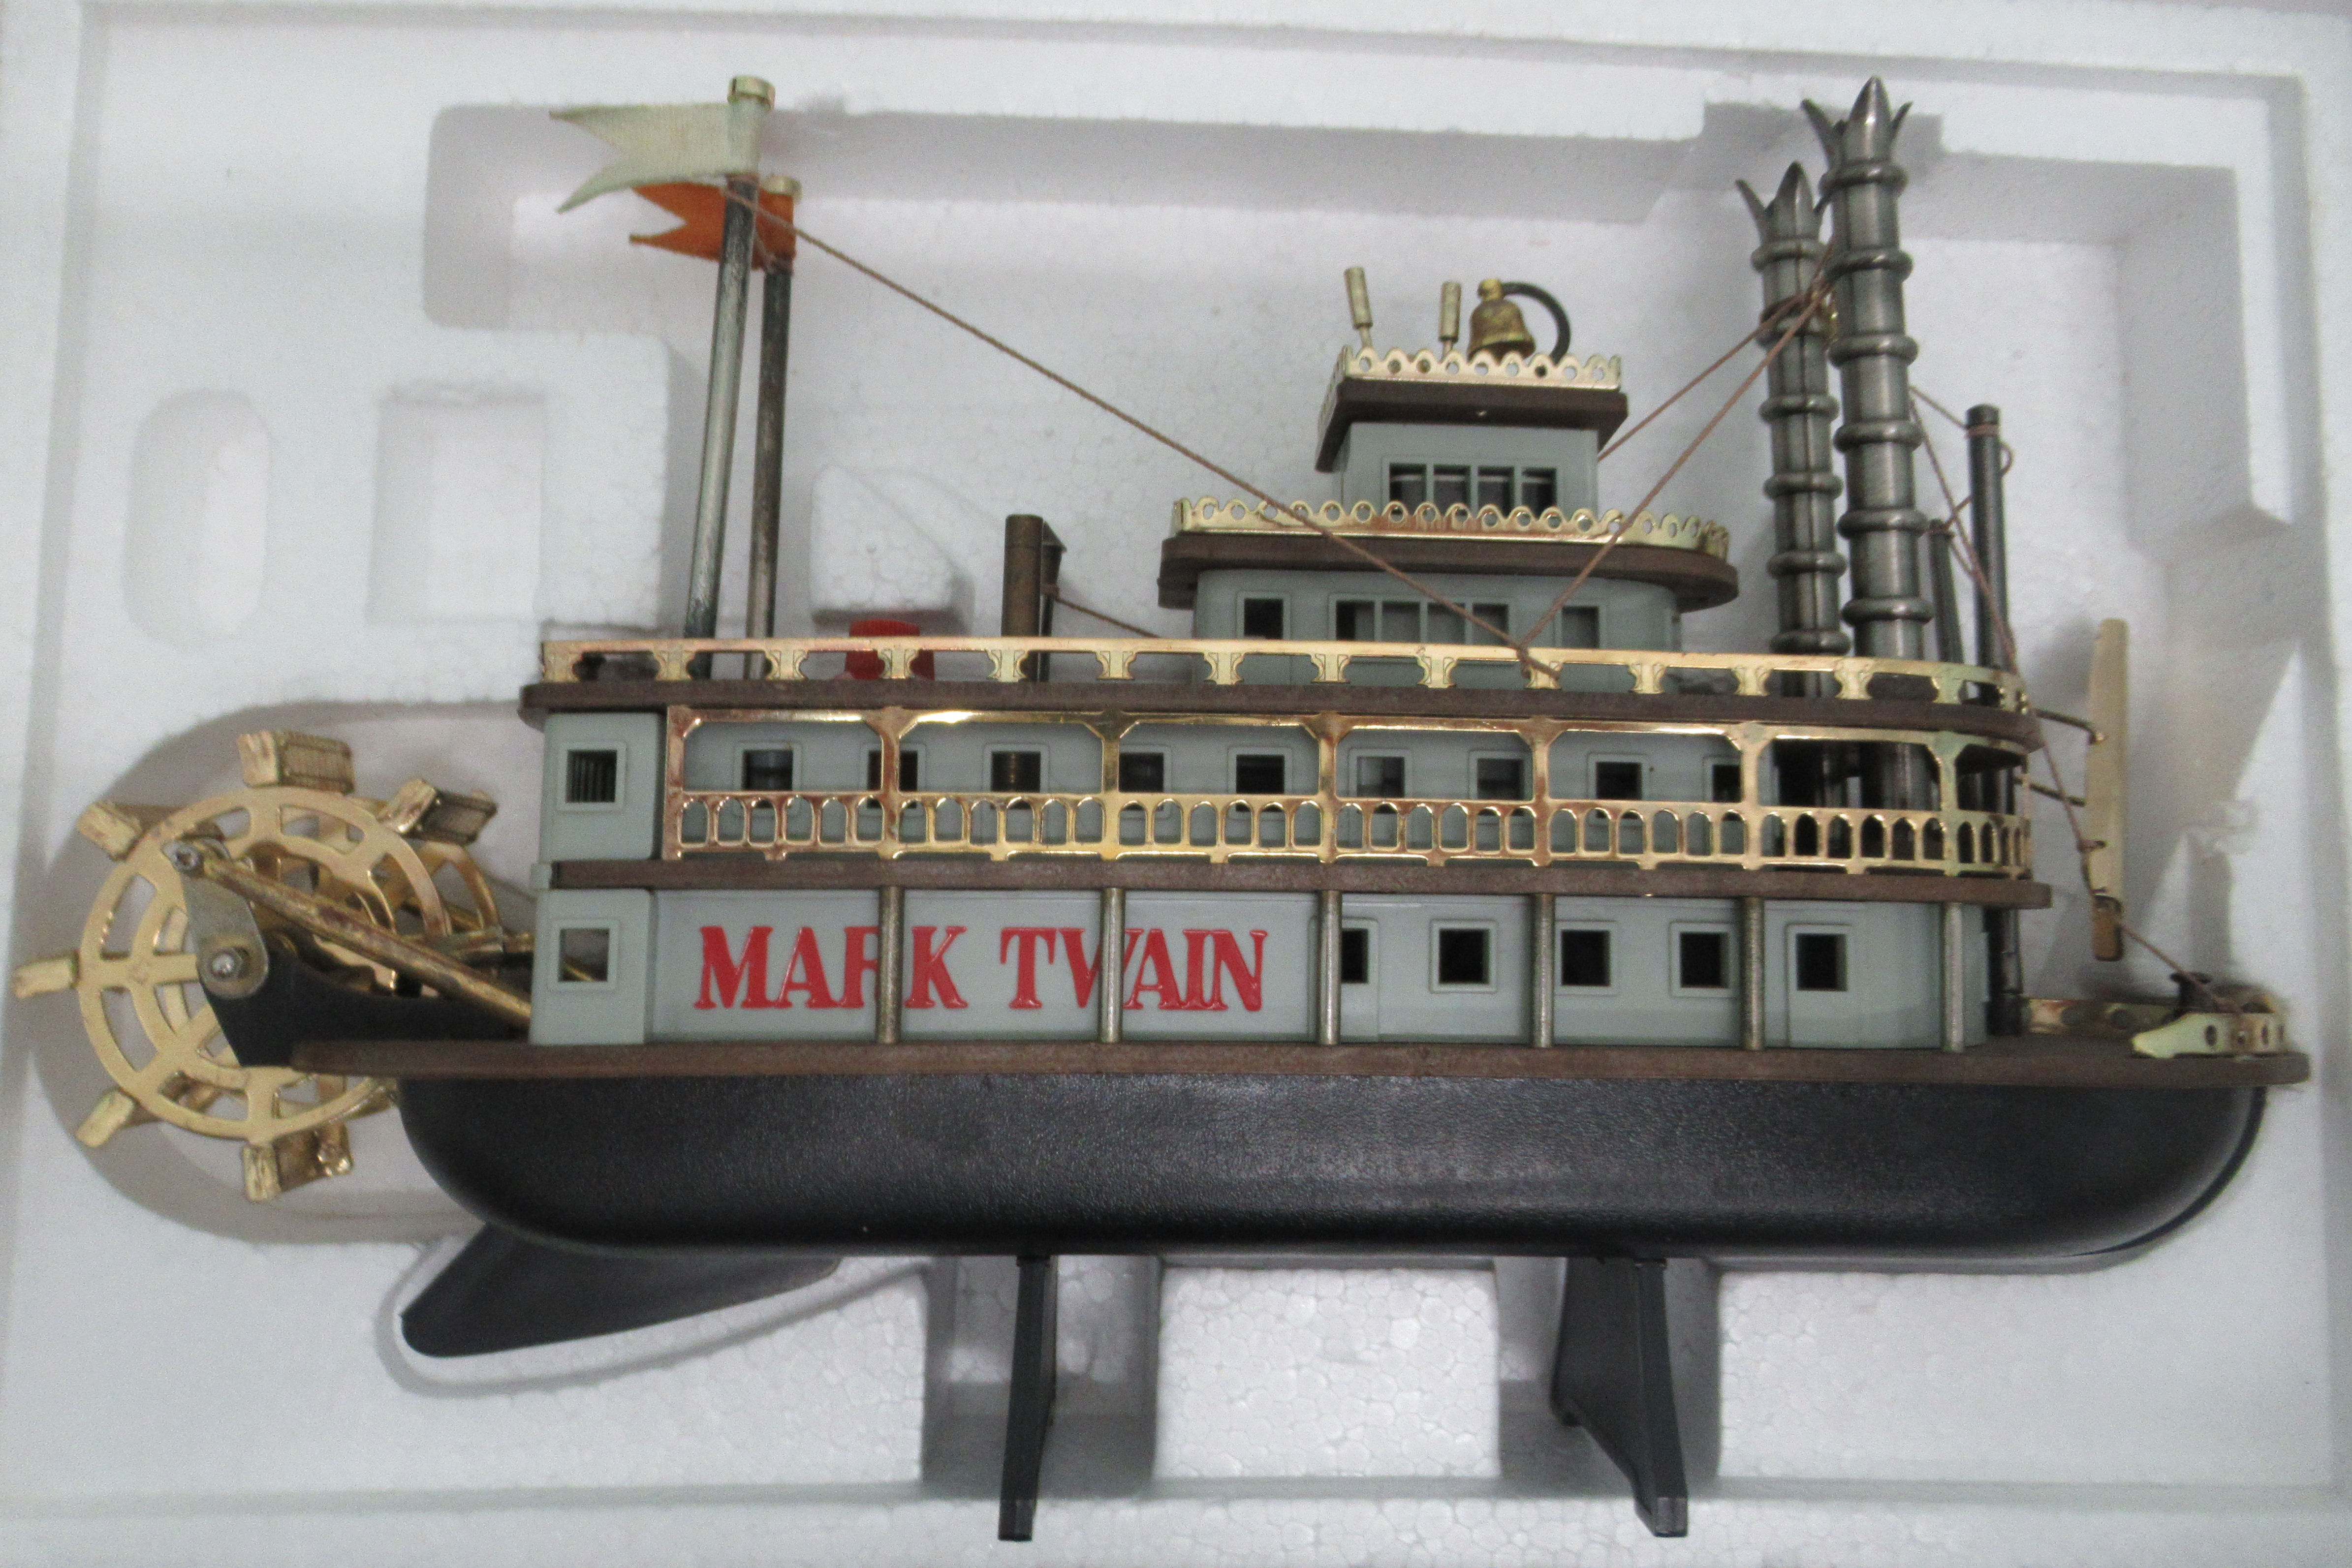 A 1960s Mark Twain novelty solid state radio, fashioned as a Mississippi paddle steamer, in the - Image 2 of 5